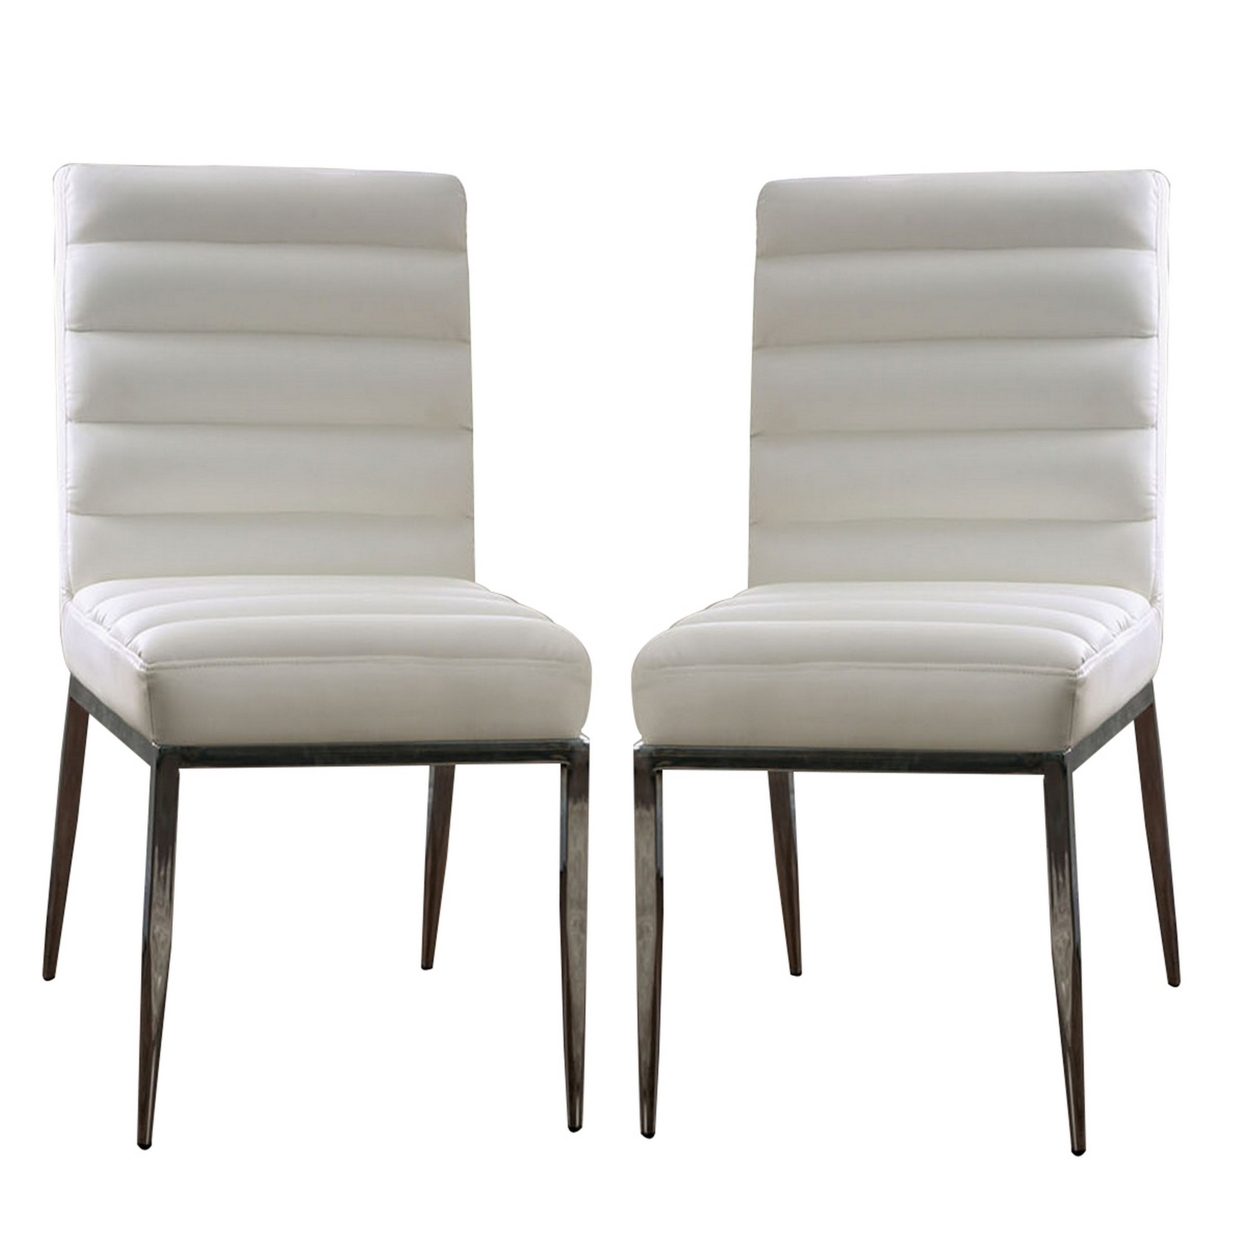 Leatherette Side Chairs With Horizontal Tufted Channels, Set Of 2, White- Saltoro Sherpi